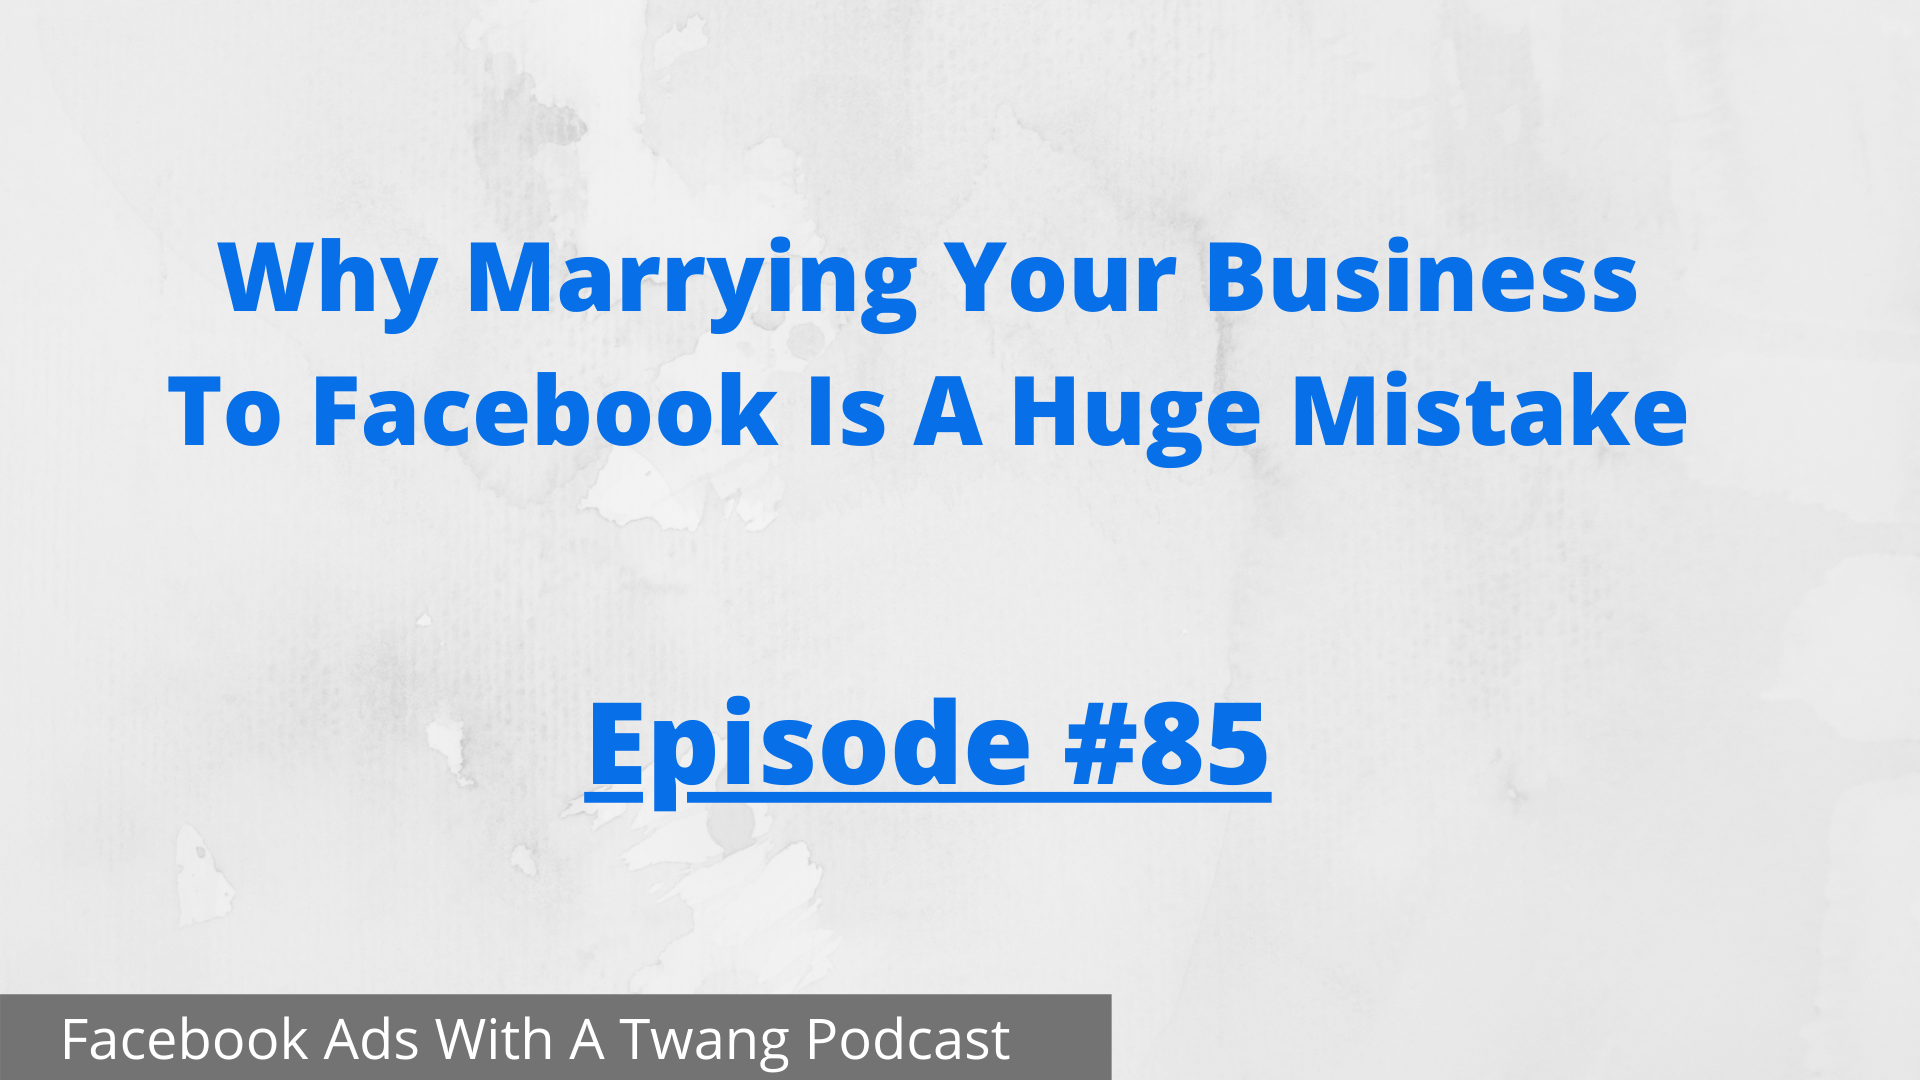 Episode #85 –  Why marrying your business to Facebook is a huge mistake